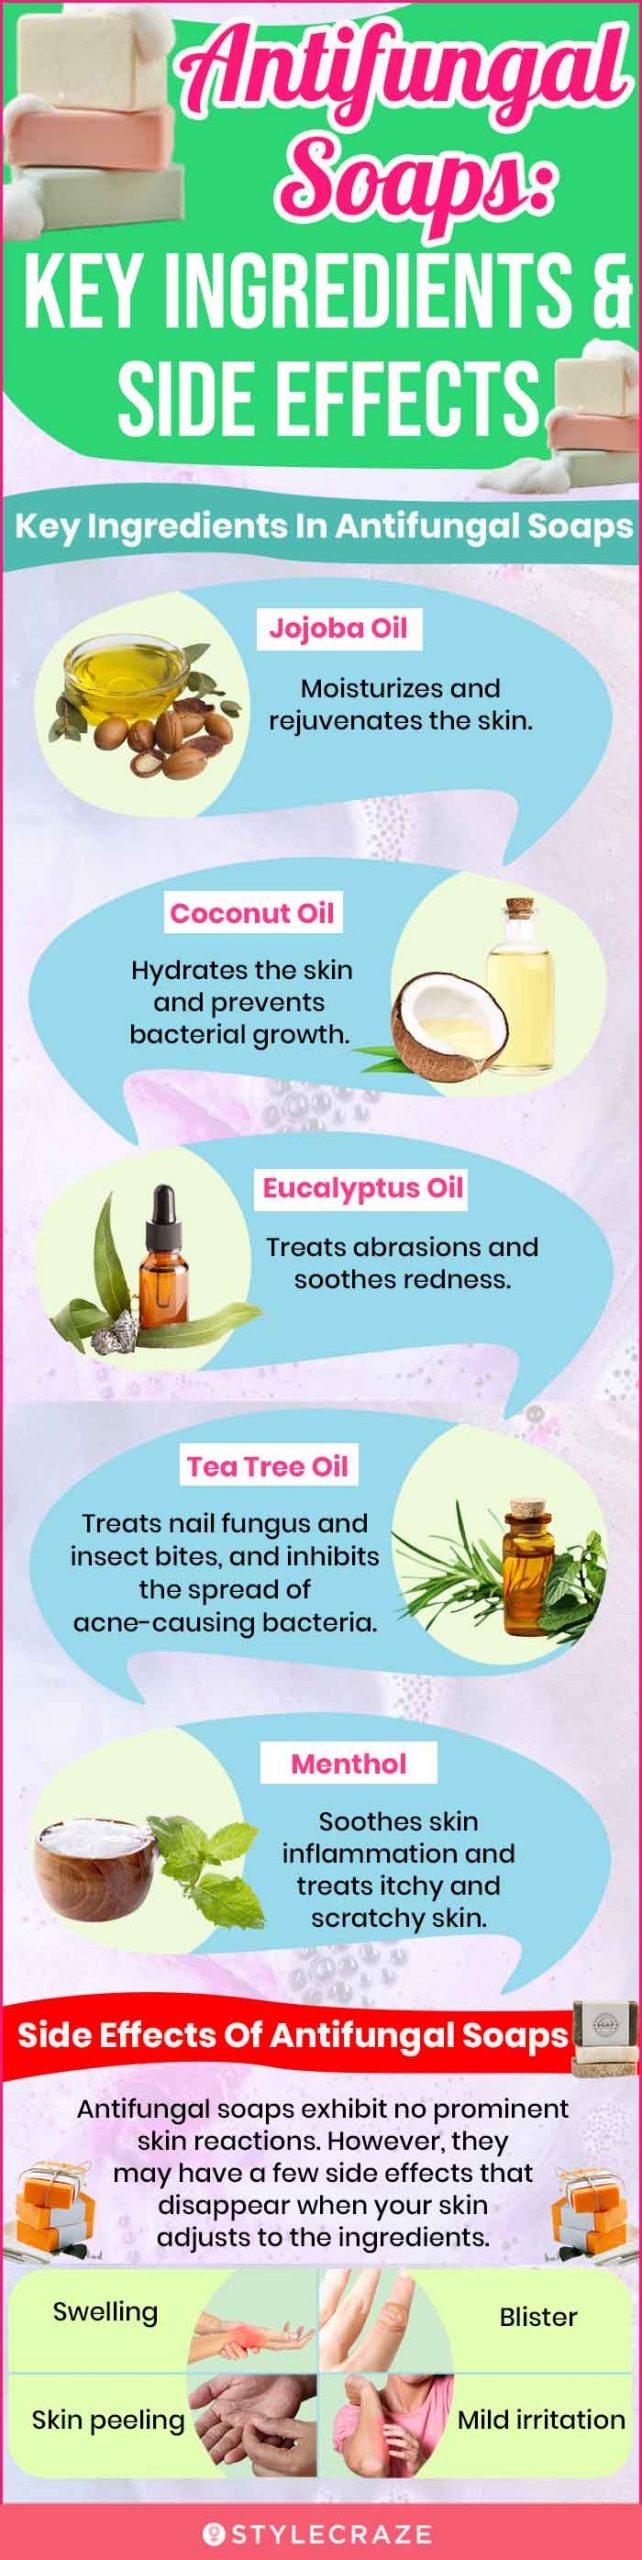 Antifungal Soaps: Key Ingredients & Side Effects [infographic]